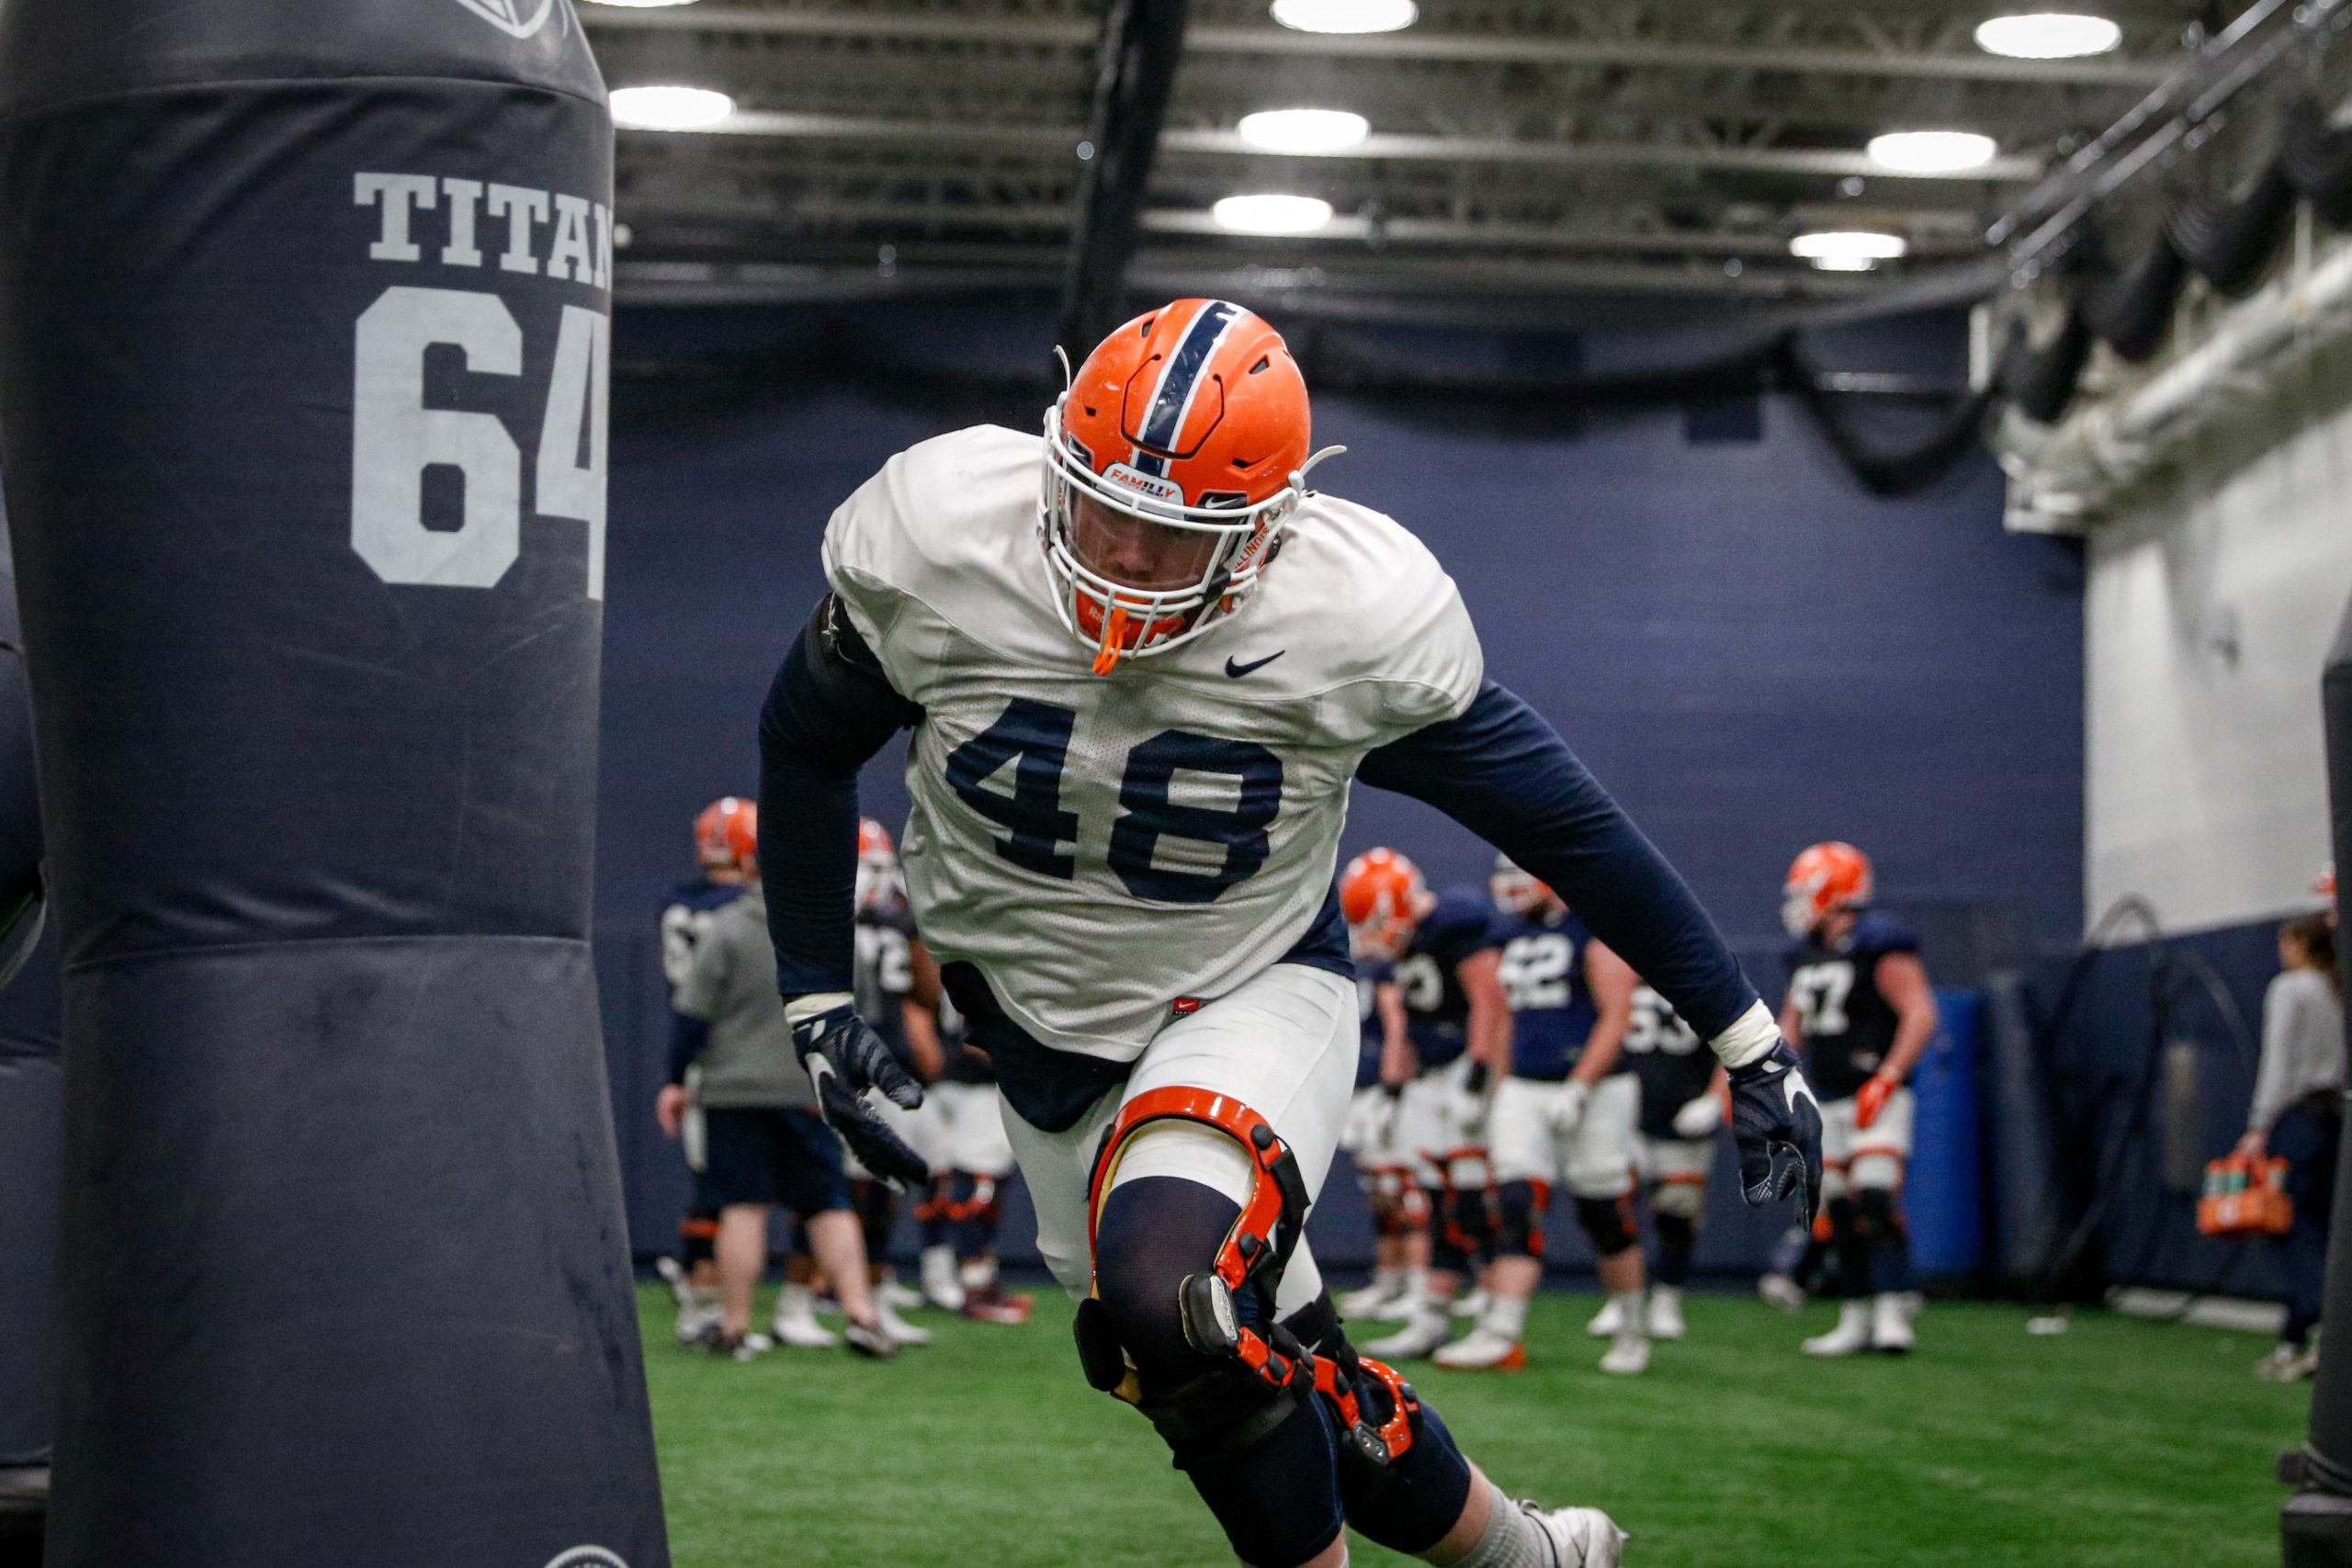 Illini Spring Football Practice Report No. 11 - Randolph’s Injury Gives Bryce Barnes Opportunity at DE 